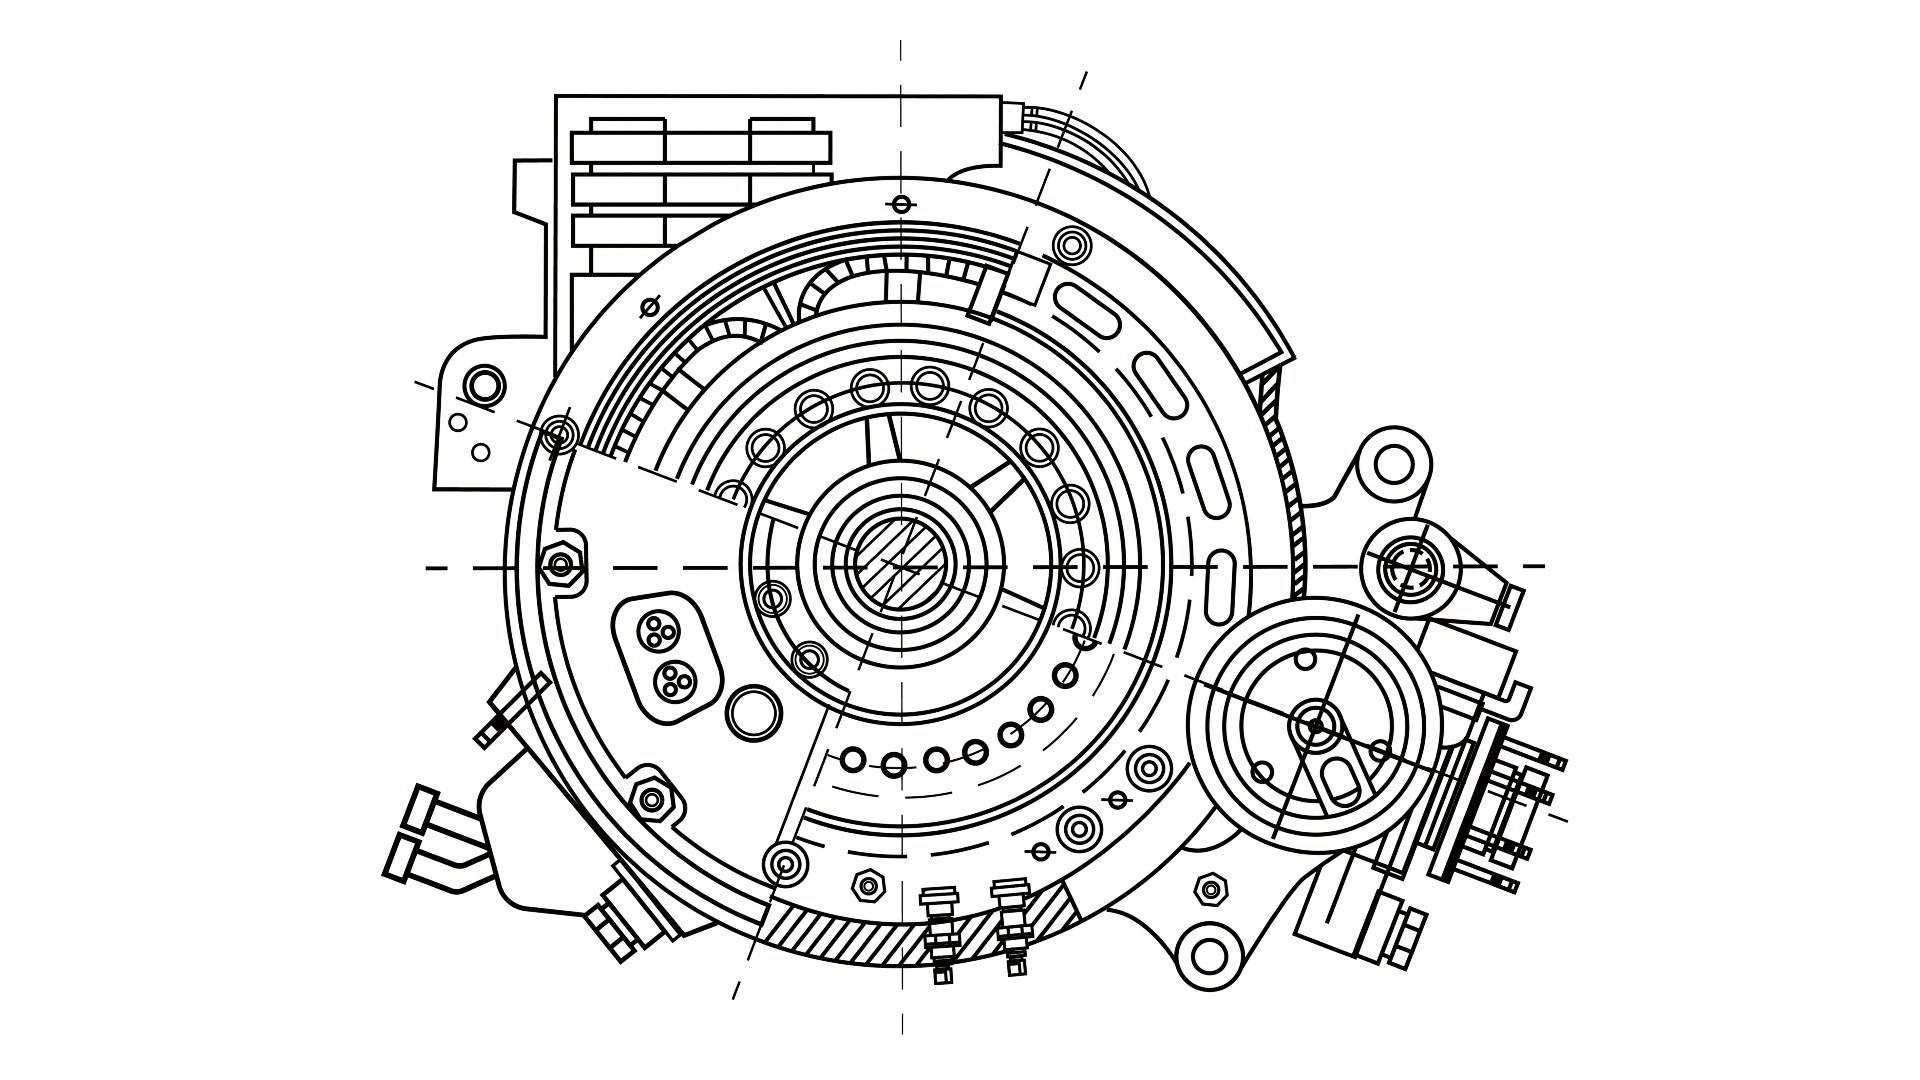 A 2-D drawing of an electric drive motor created in CAD software.